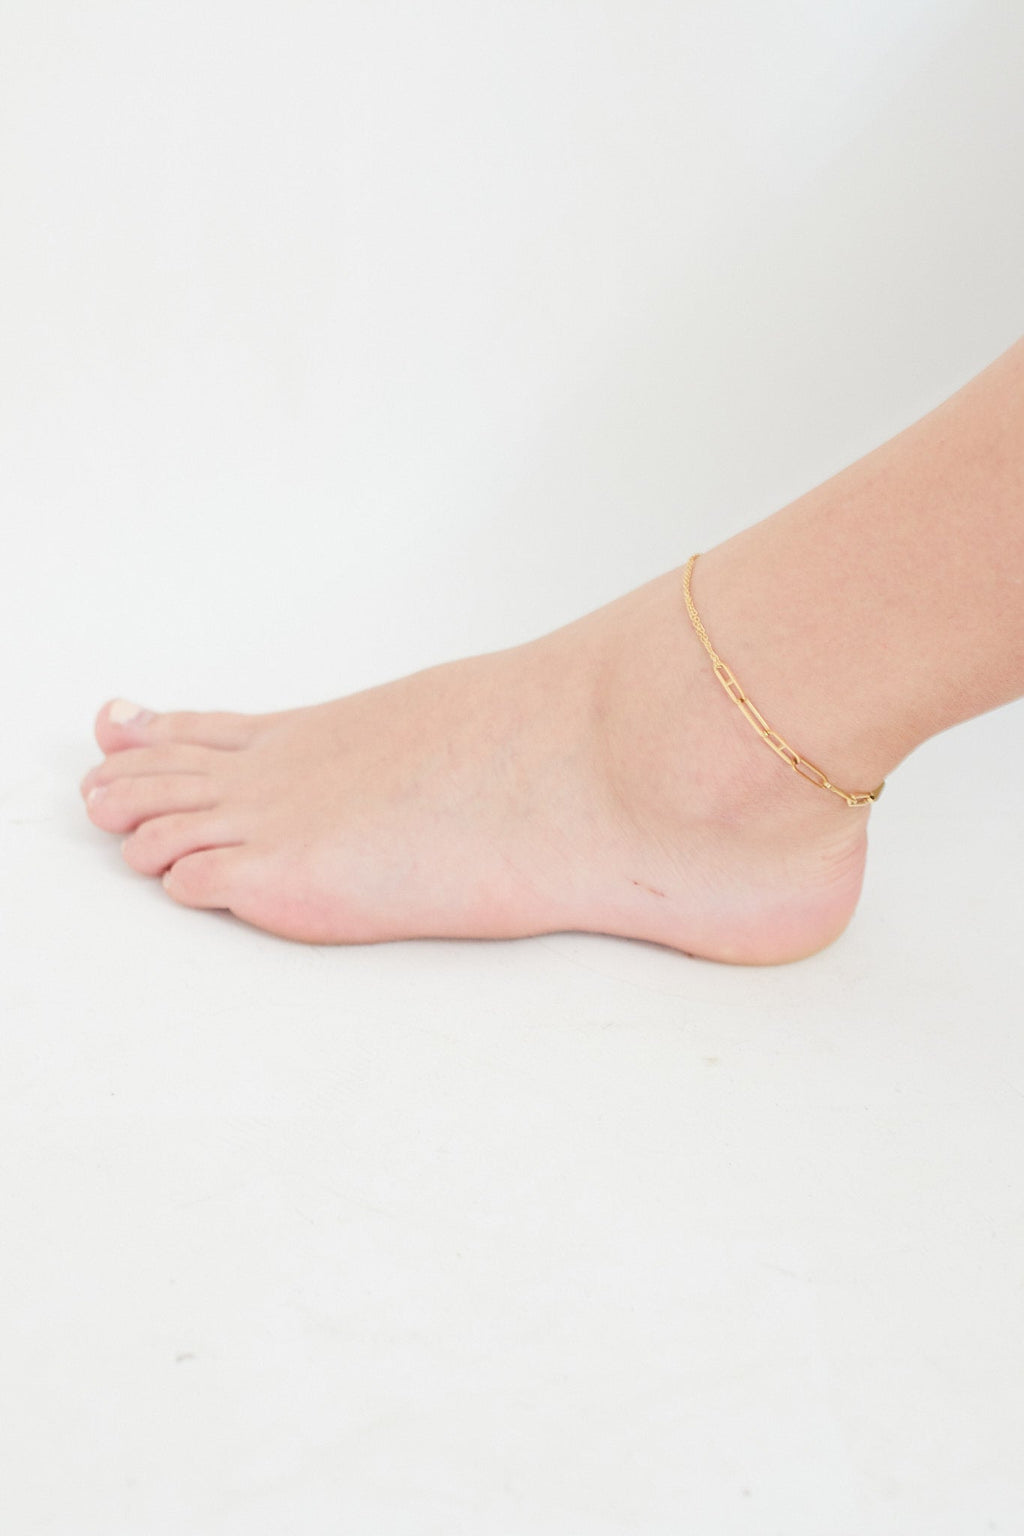 Dual Chain Anklet - Driftwood Maui & Home By Driftwood